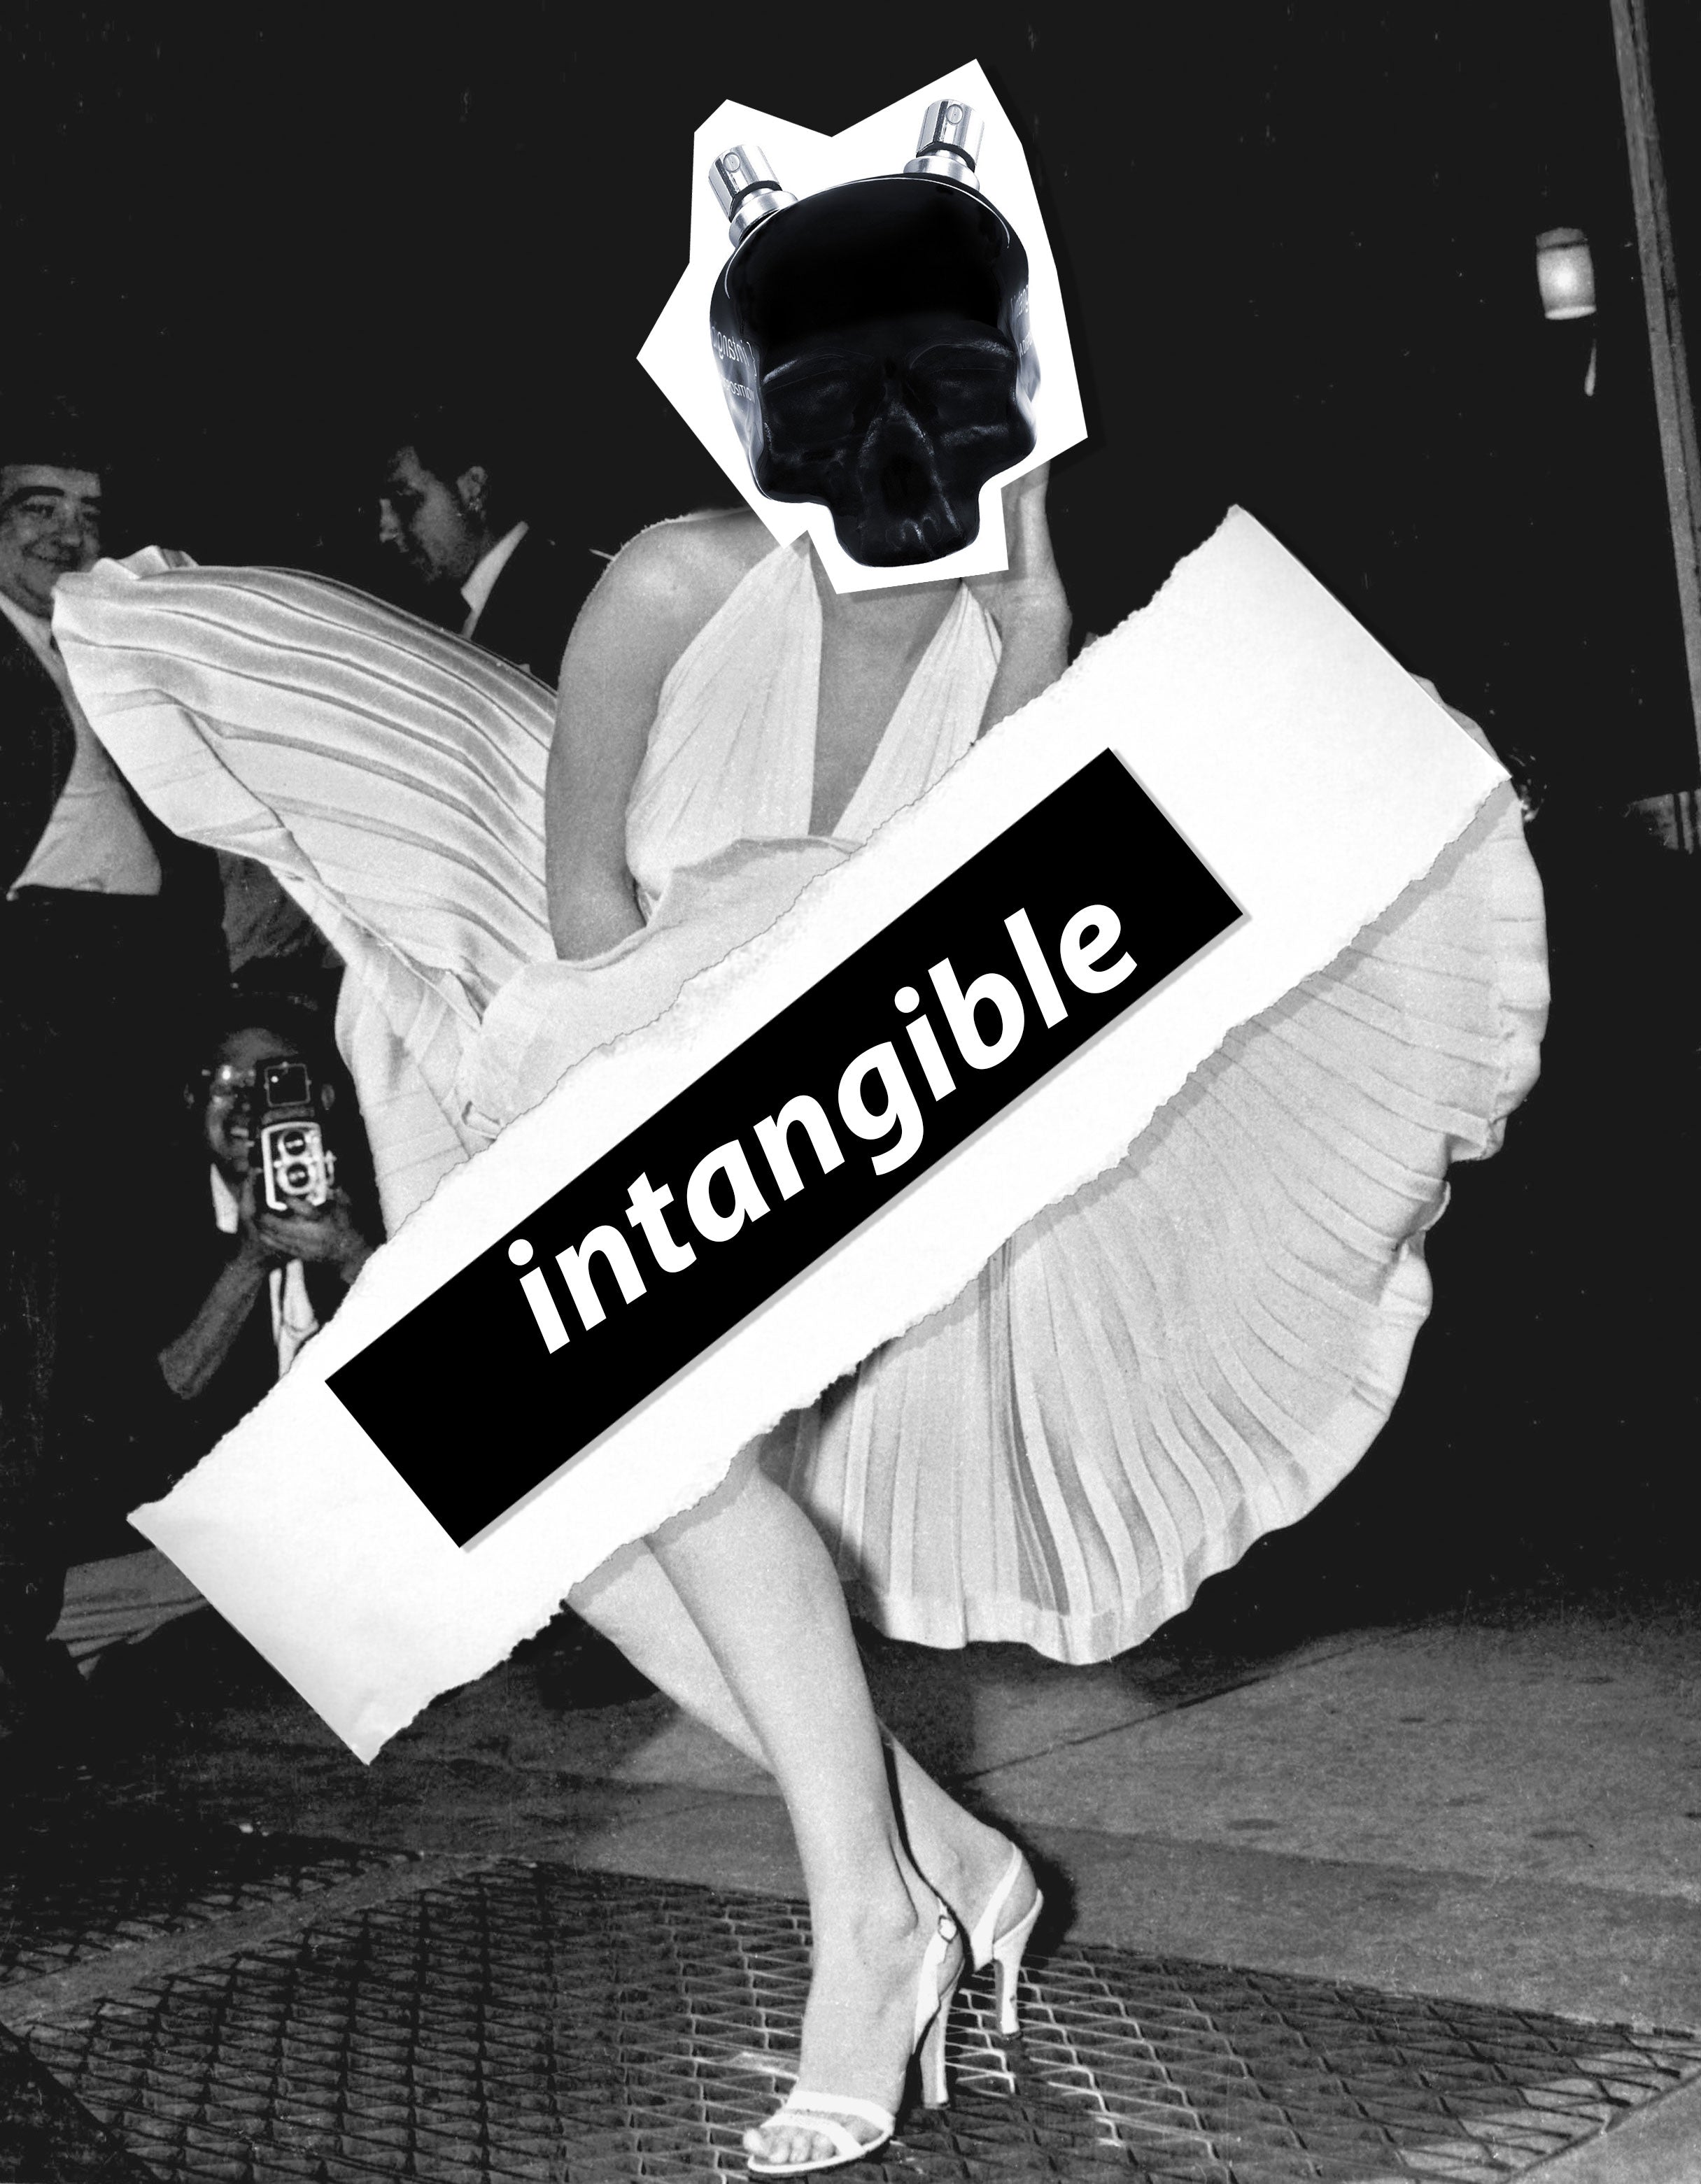 intangible for her